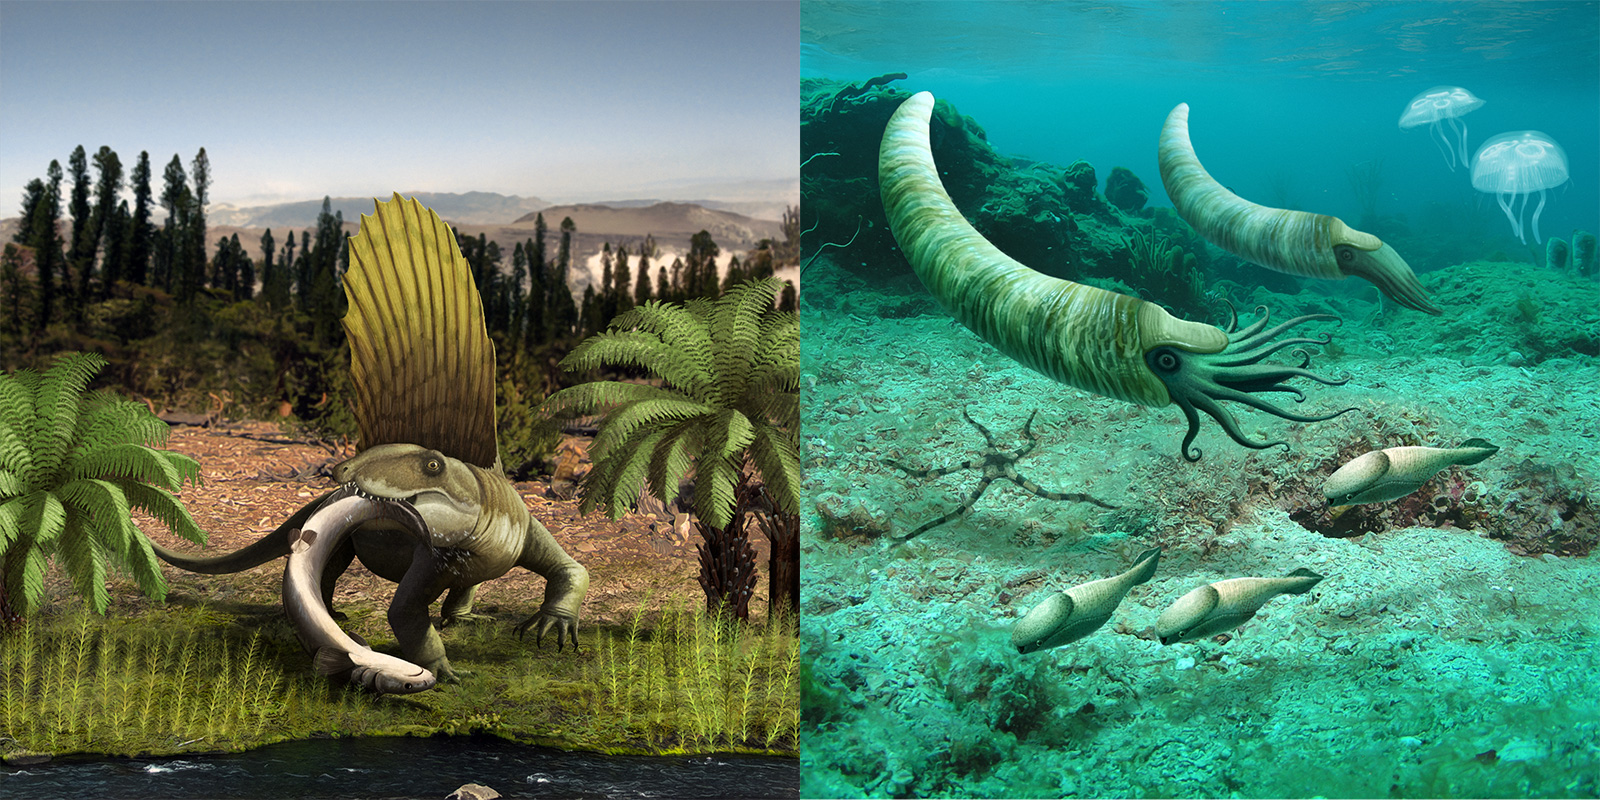 Two paleoillustrations showing extinct terrestrial and marine animals in their environments.